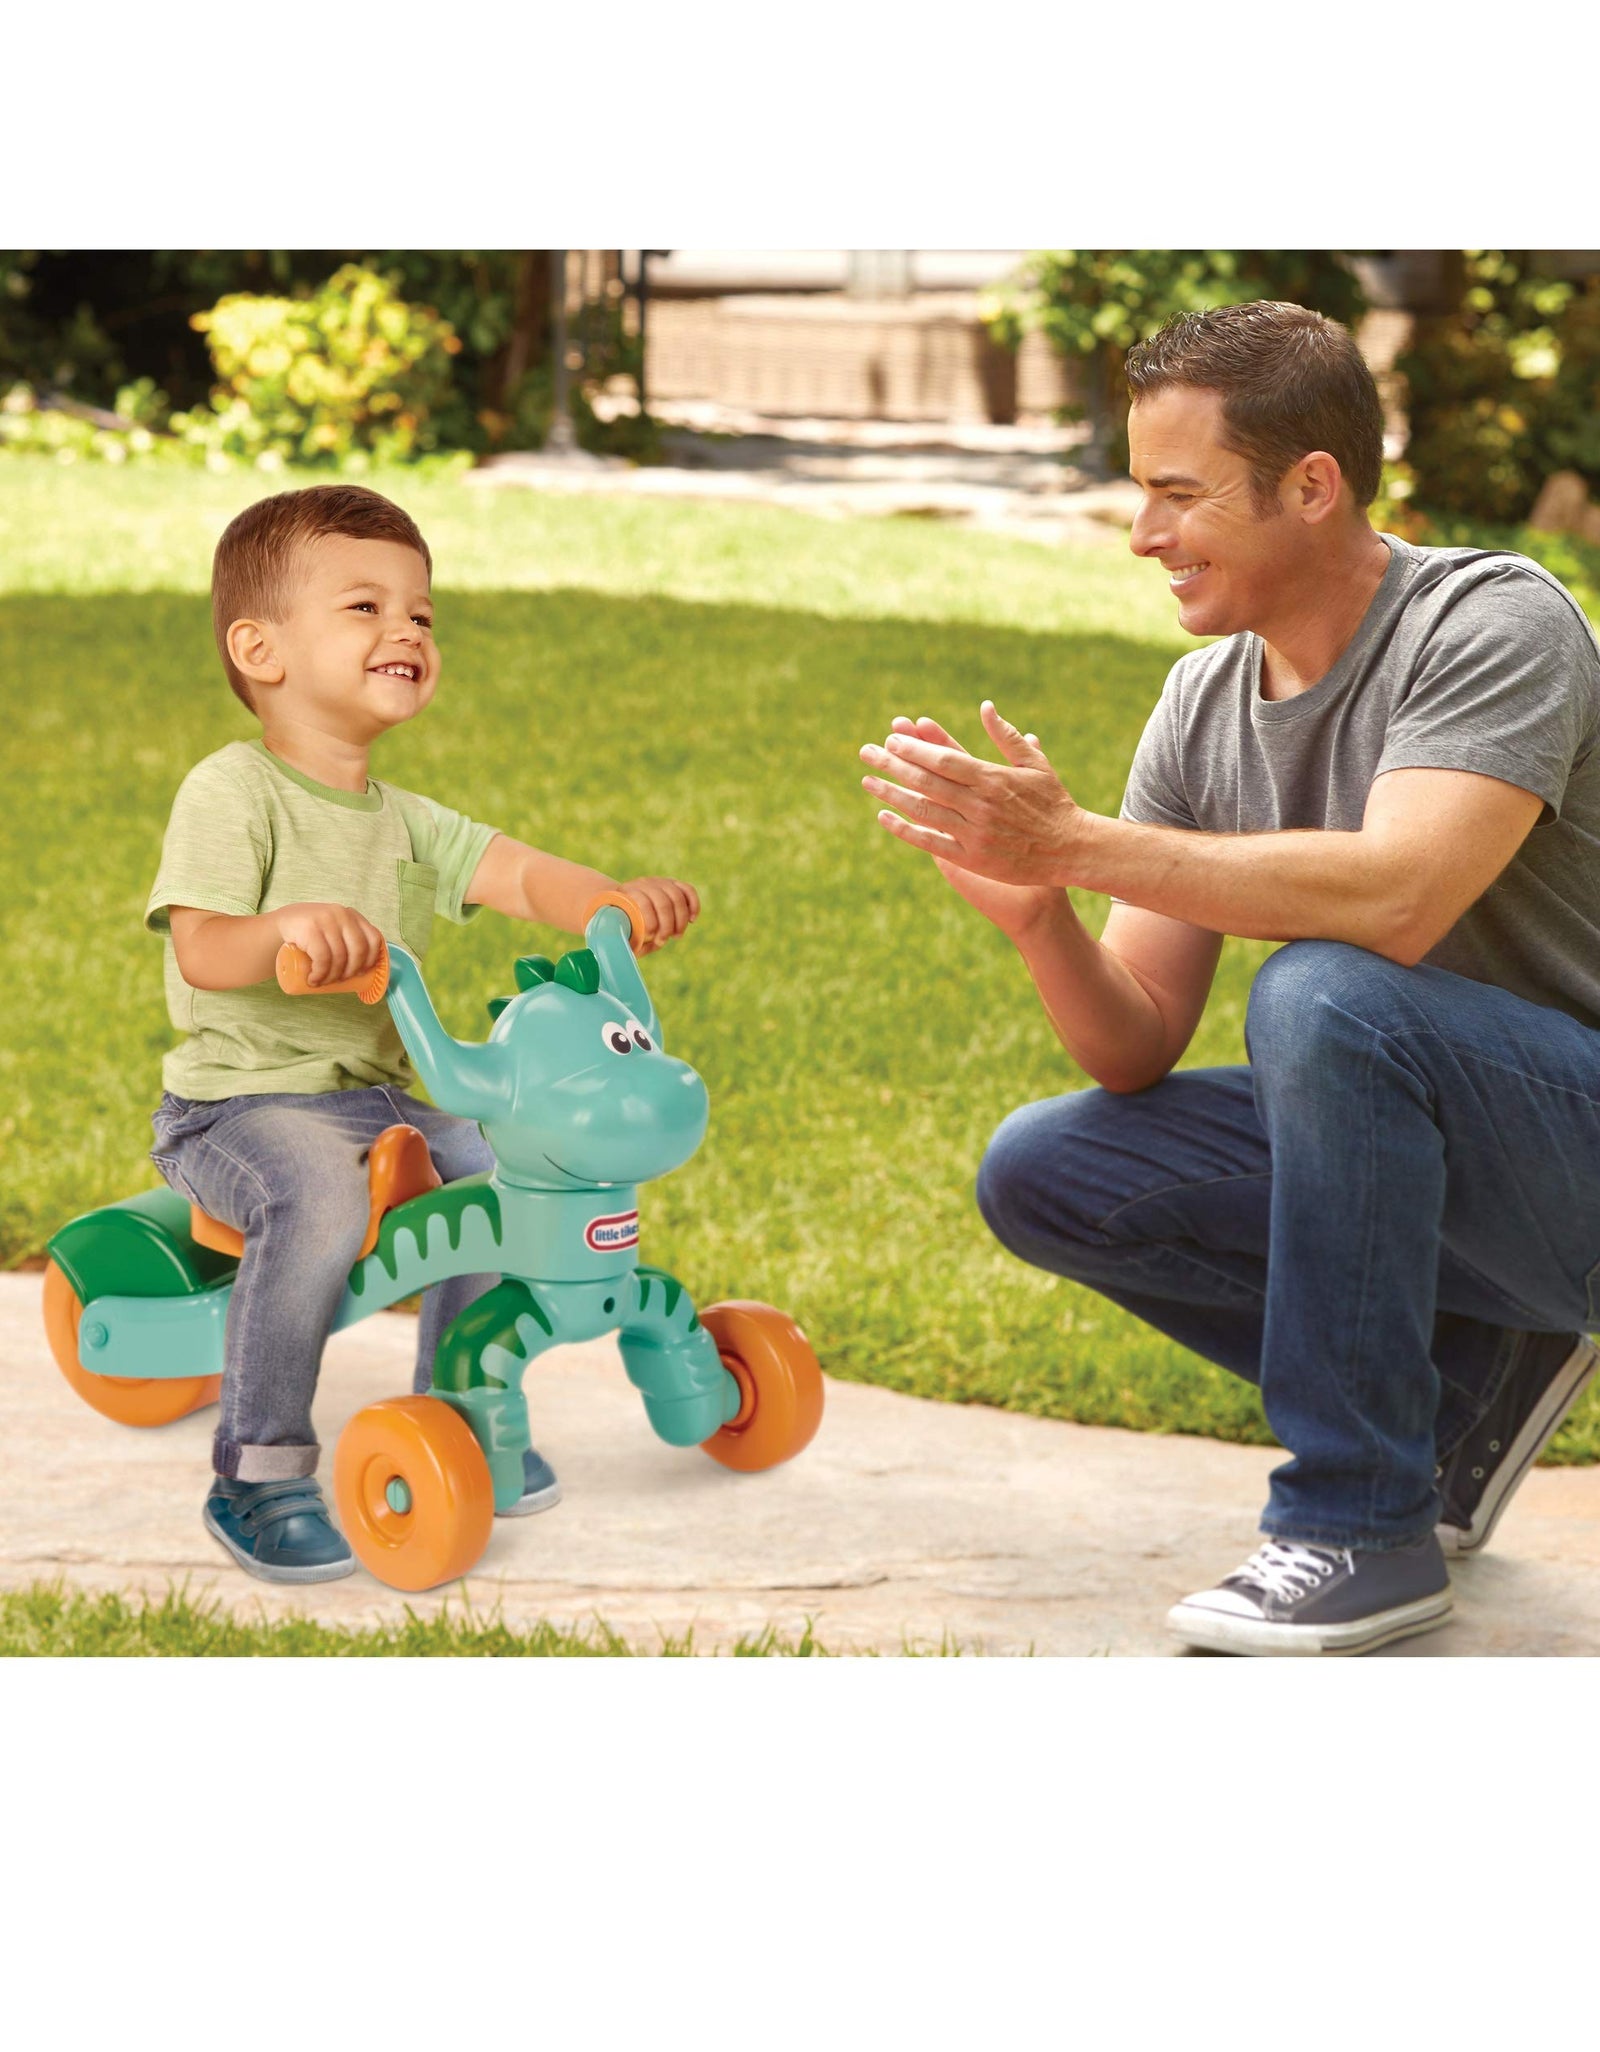 Little Tikes Go and Grow Dino Indoor Outdoor Ride On Toy Trike for Preschool Kids - Toddlers Dinosaur Inspired Toys and Toddler Trike to Develop Motor Skills for Boys Girls Age 1-3 Years